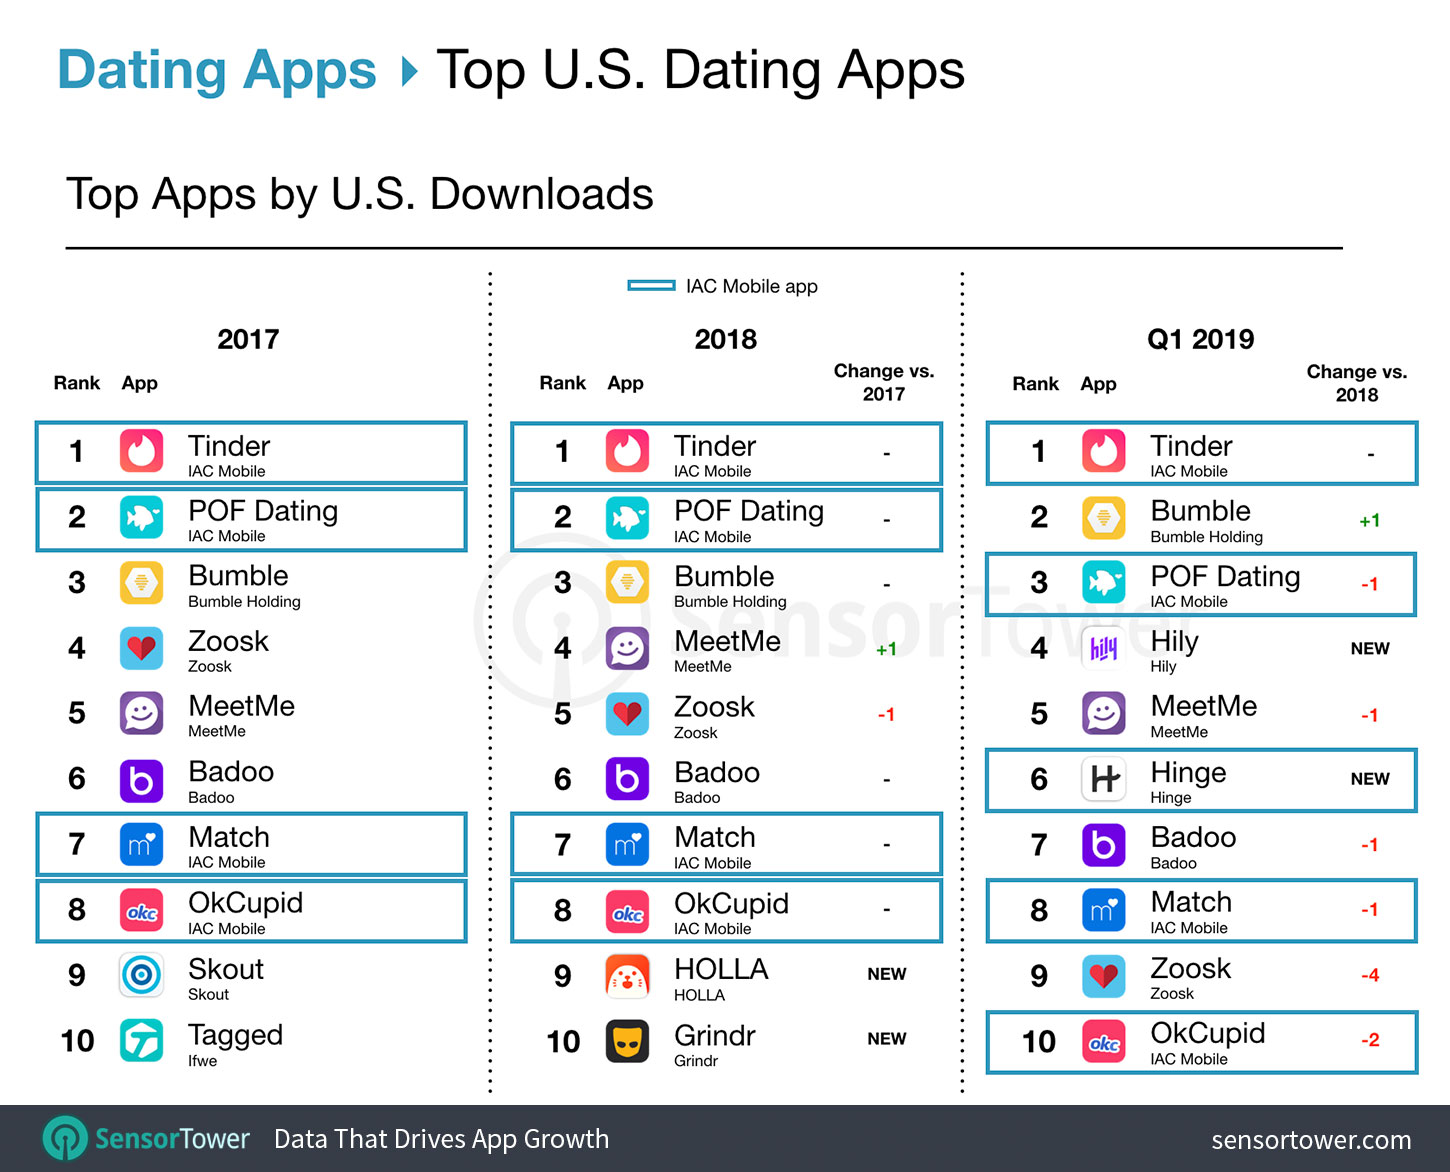 Top Dating Apps in the U.S. by Downloads Comparison from 2017-2019